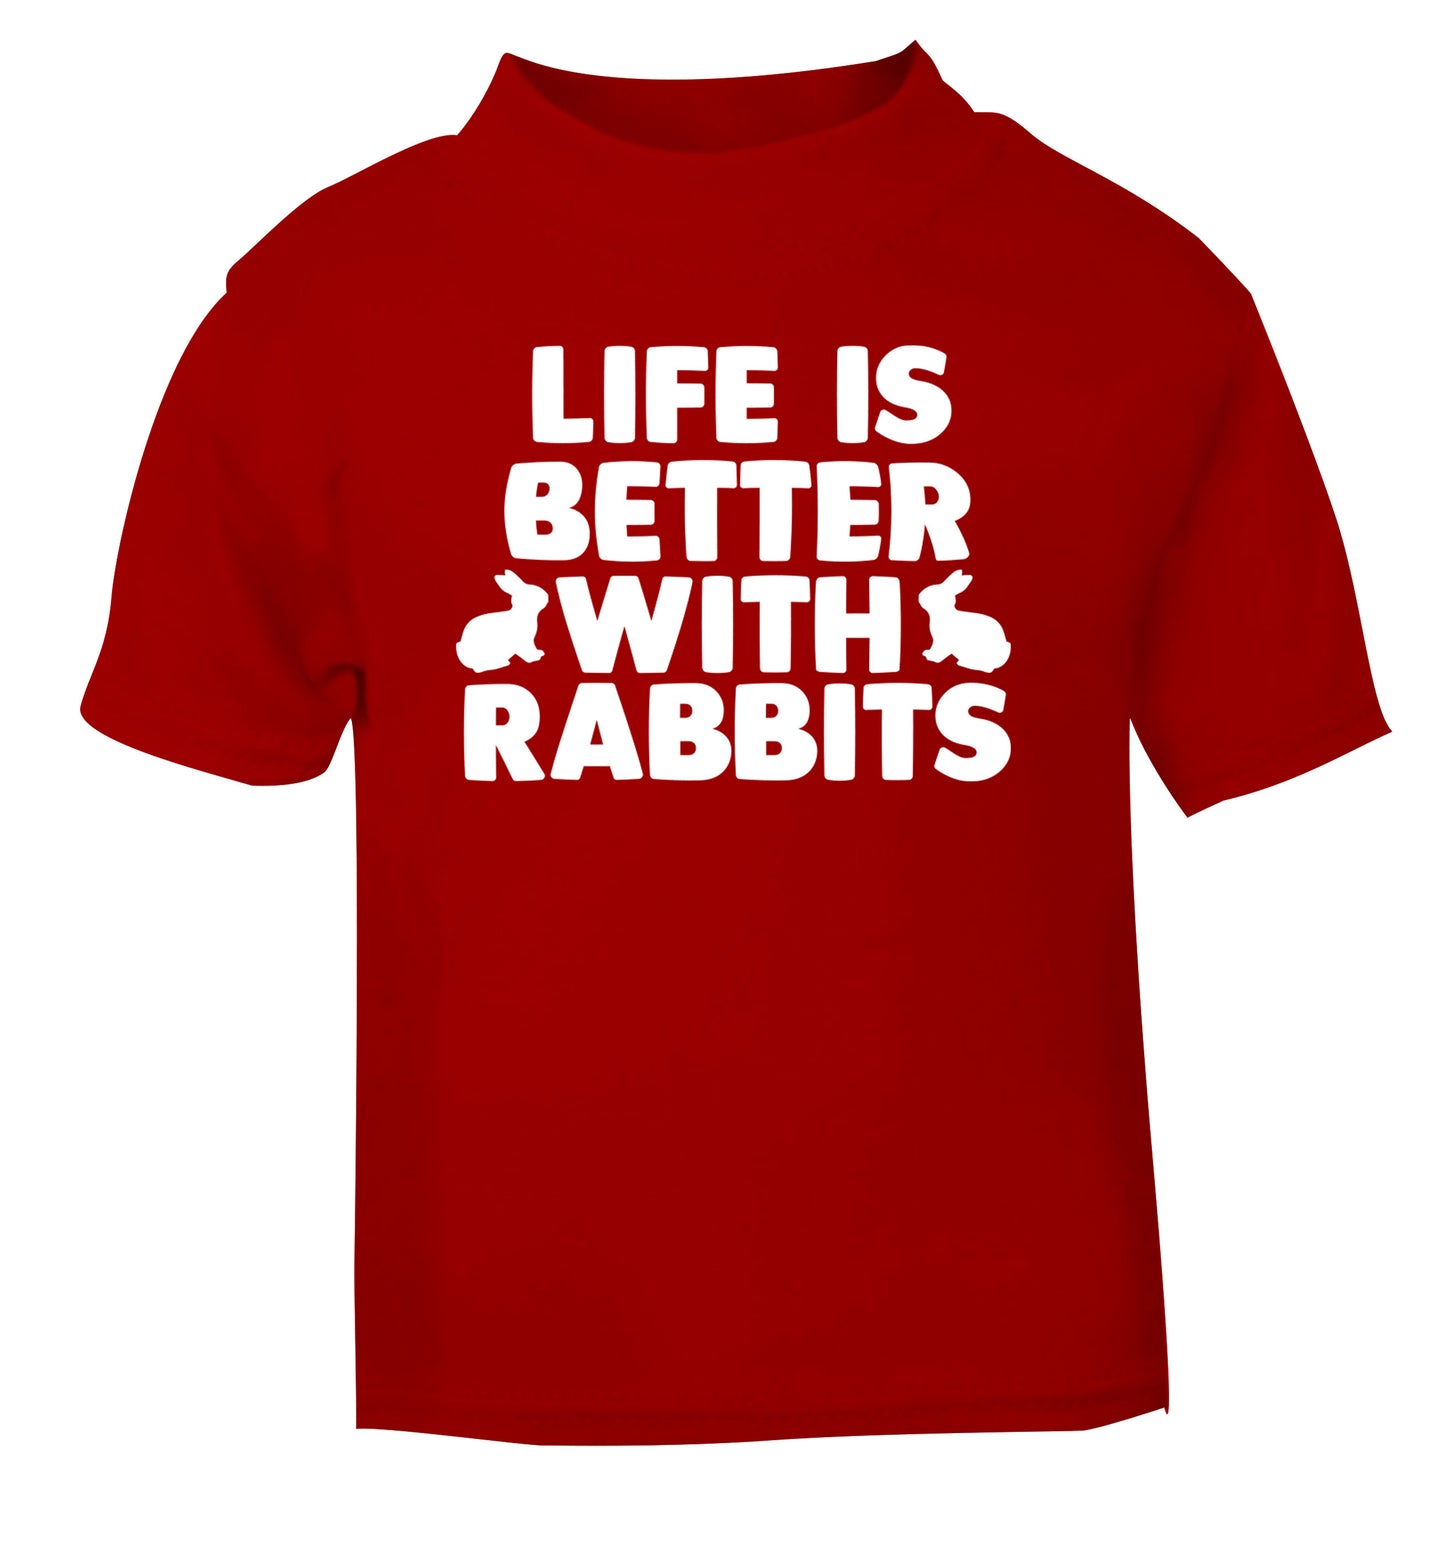 Life is better with rabbits red Baby Toddler Tshirt 2 Years